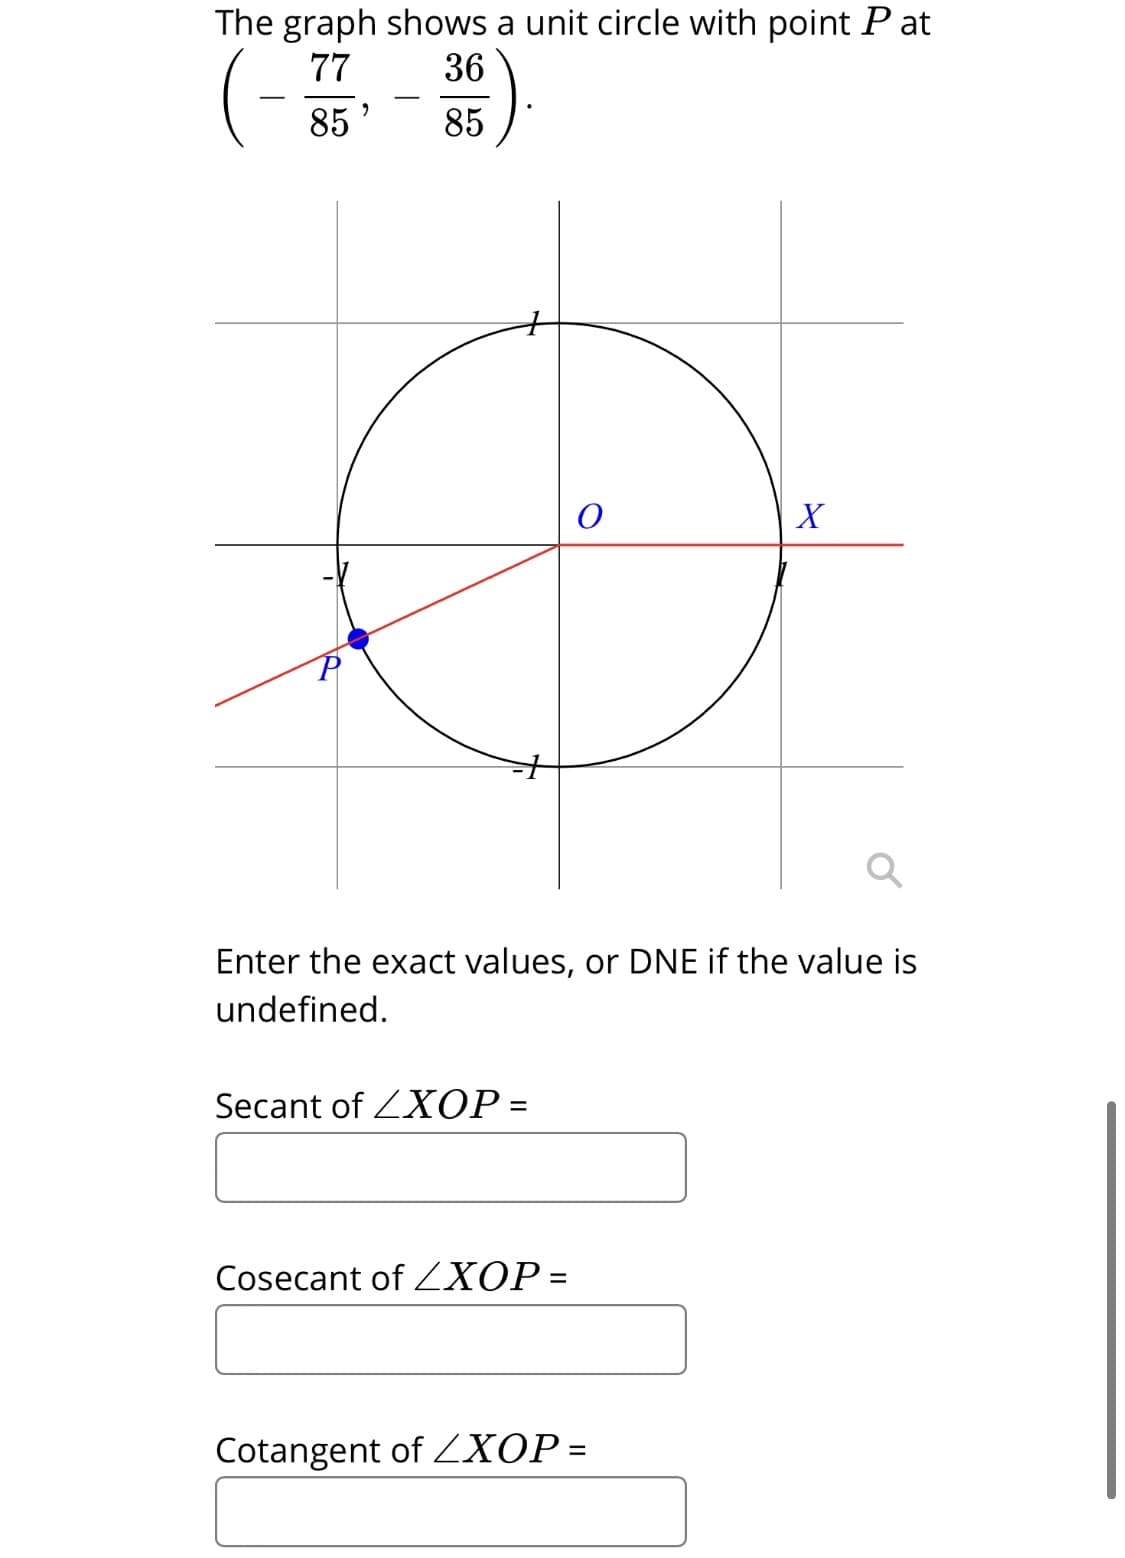 The graph shows a unit circle with point P at
77
36
85
85
X
Enter the exact values, or DNE if the value is
undefined.
Secant of ZXOP =
Cosecant of ZXOP =
Cotangent of ZXOP=
